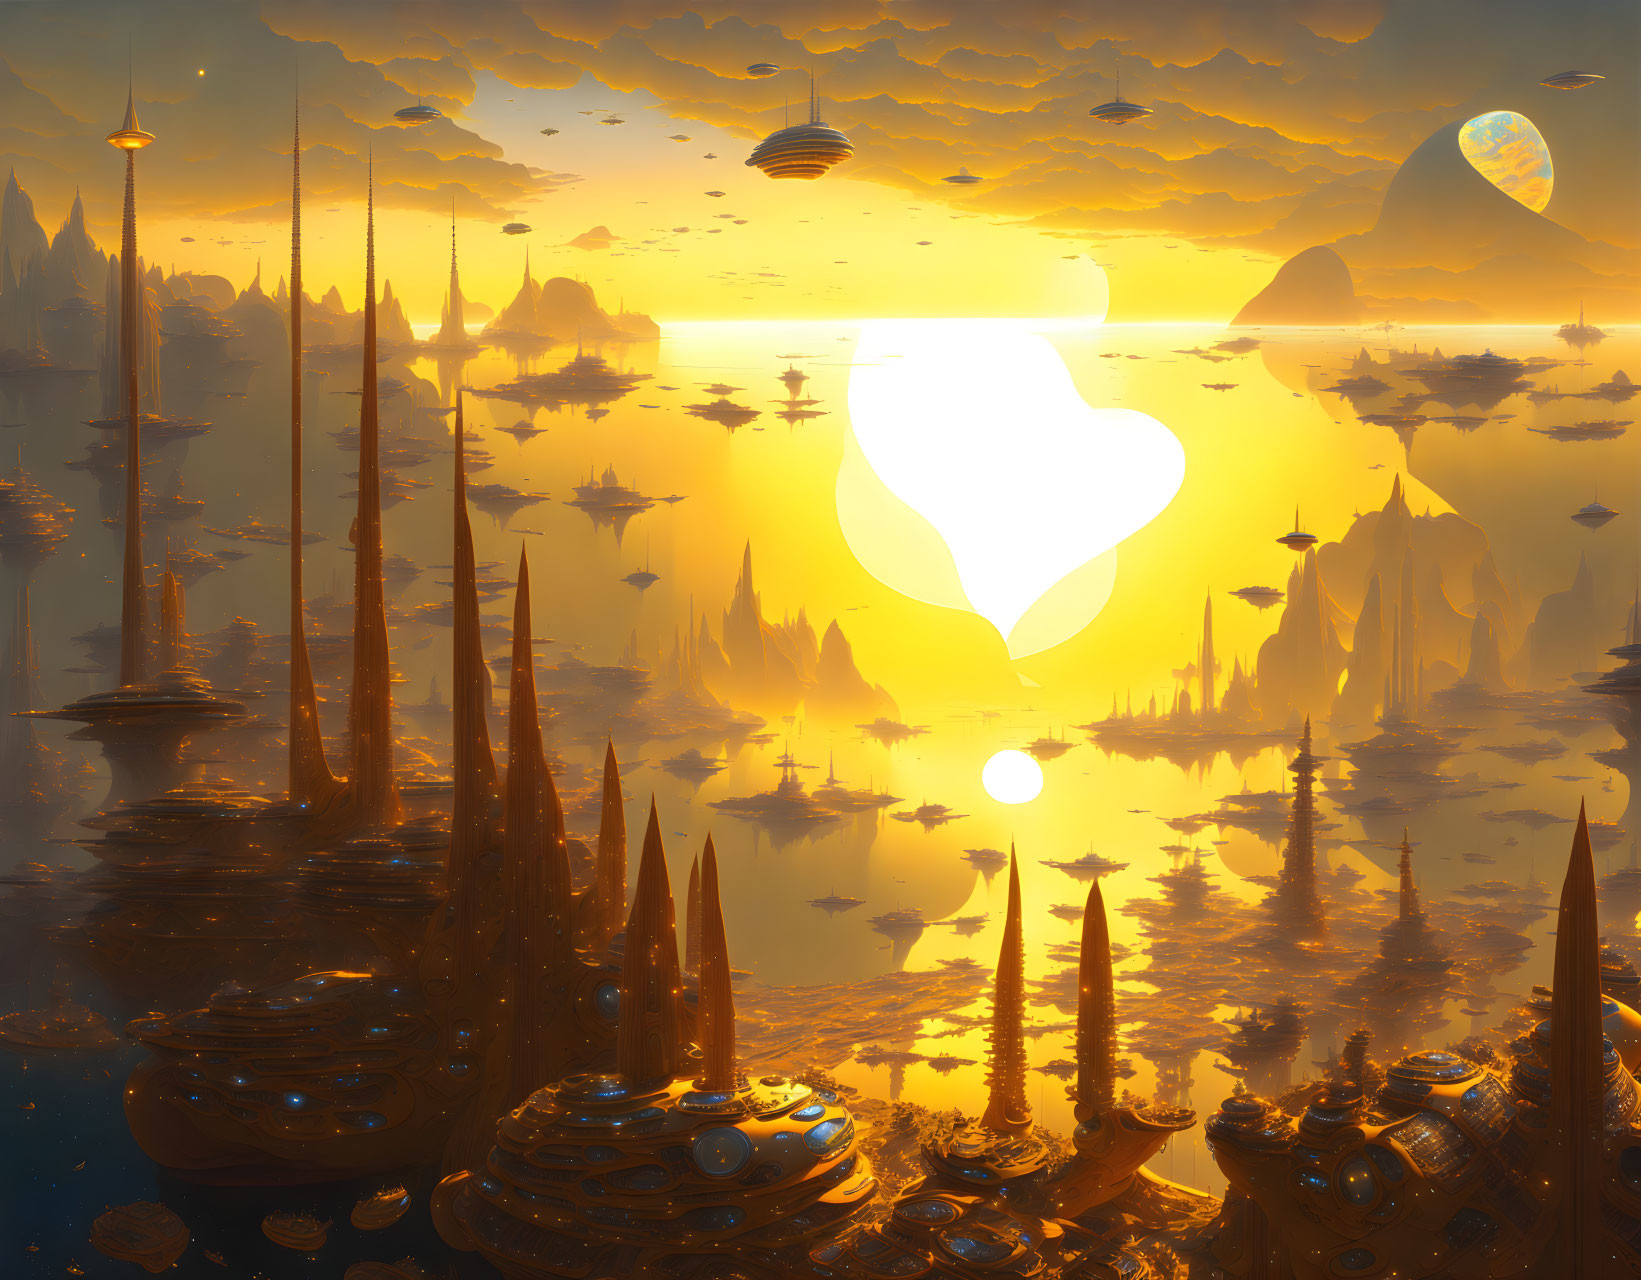 Sci-fi sunset landscape with towering spires and floating structures